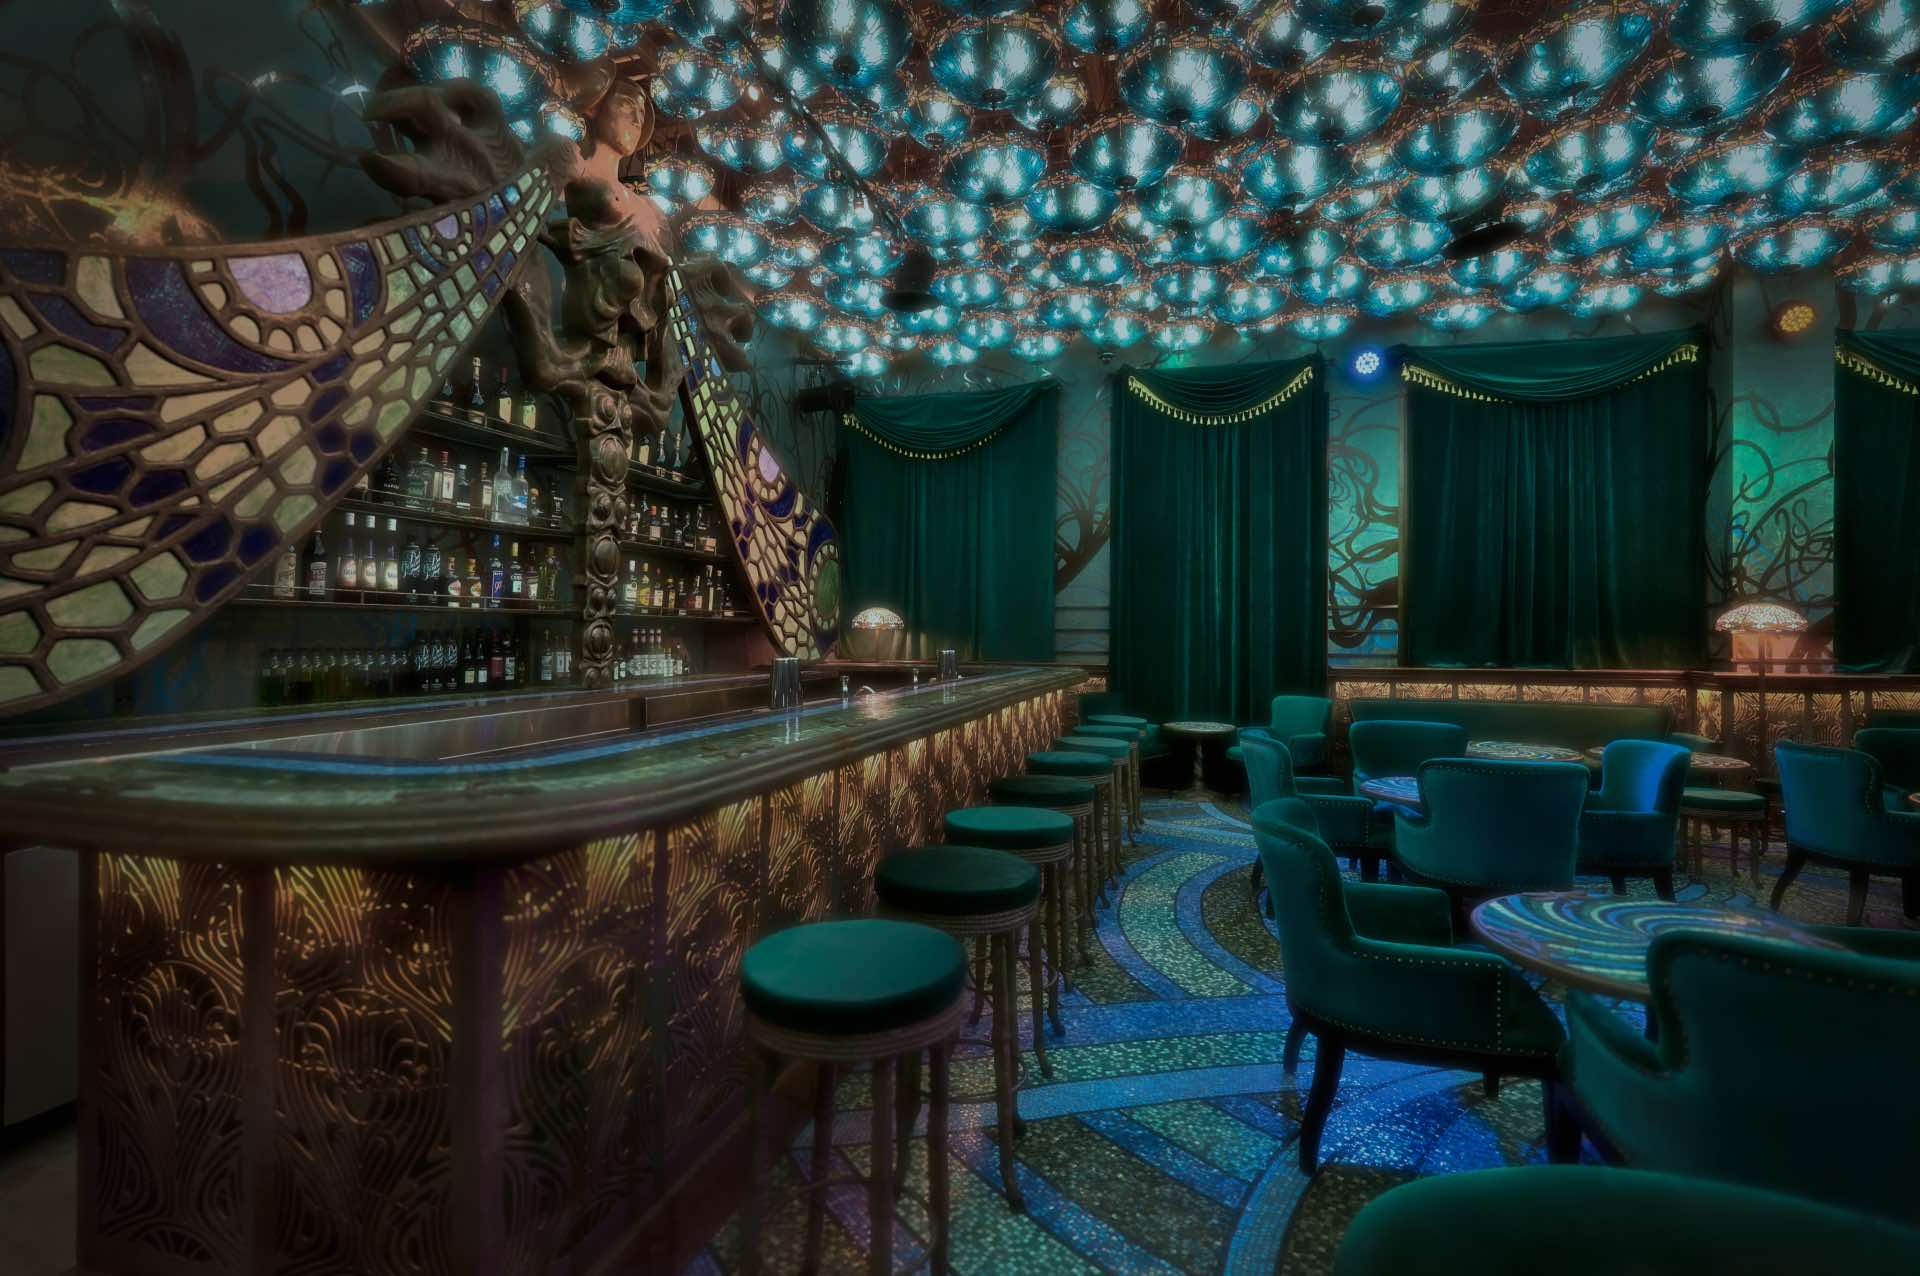 , Dragonfly bar buzzes into Singapore with Art Nouveau decor and bespoke cocktails